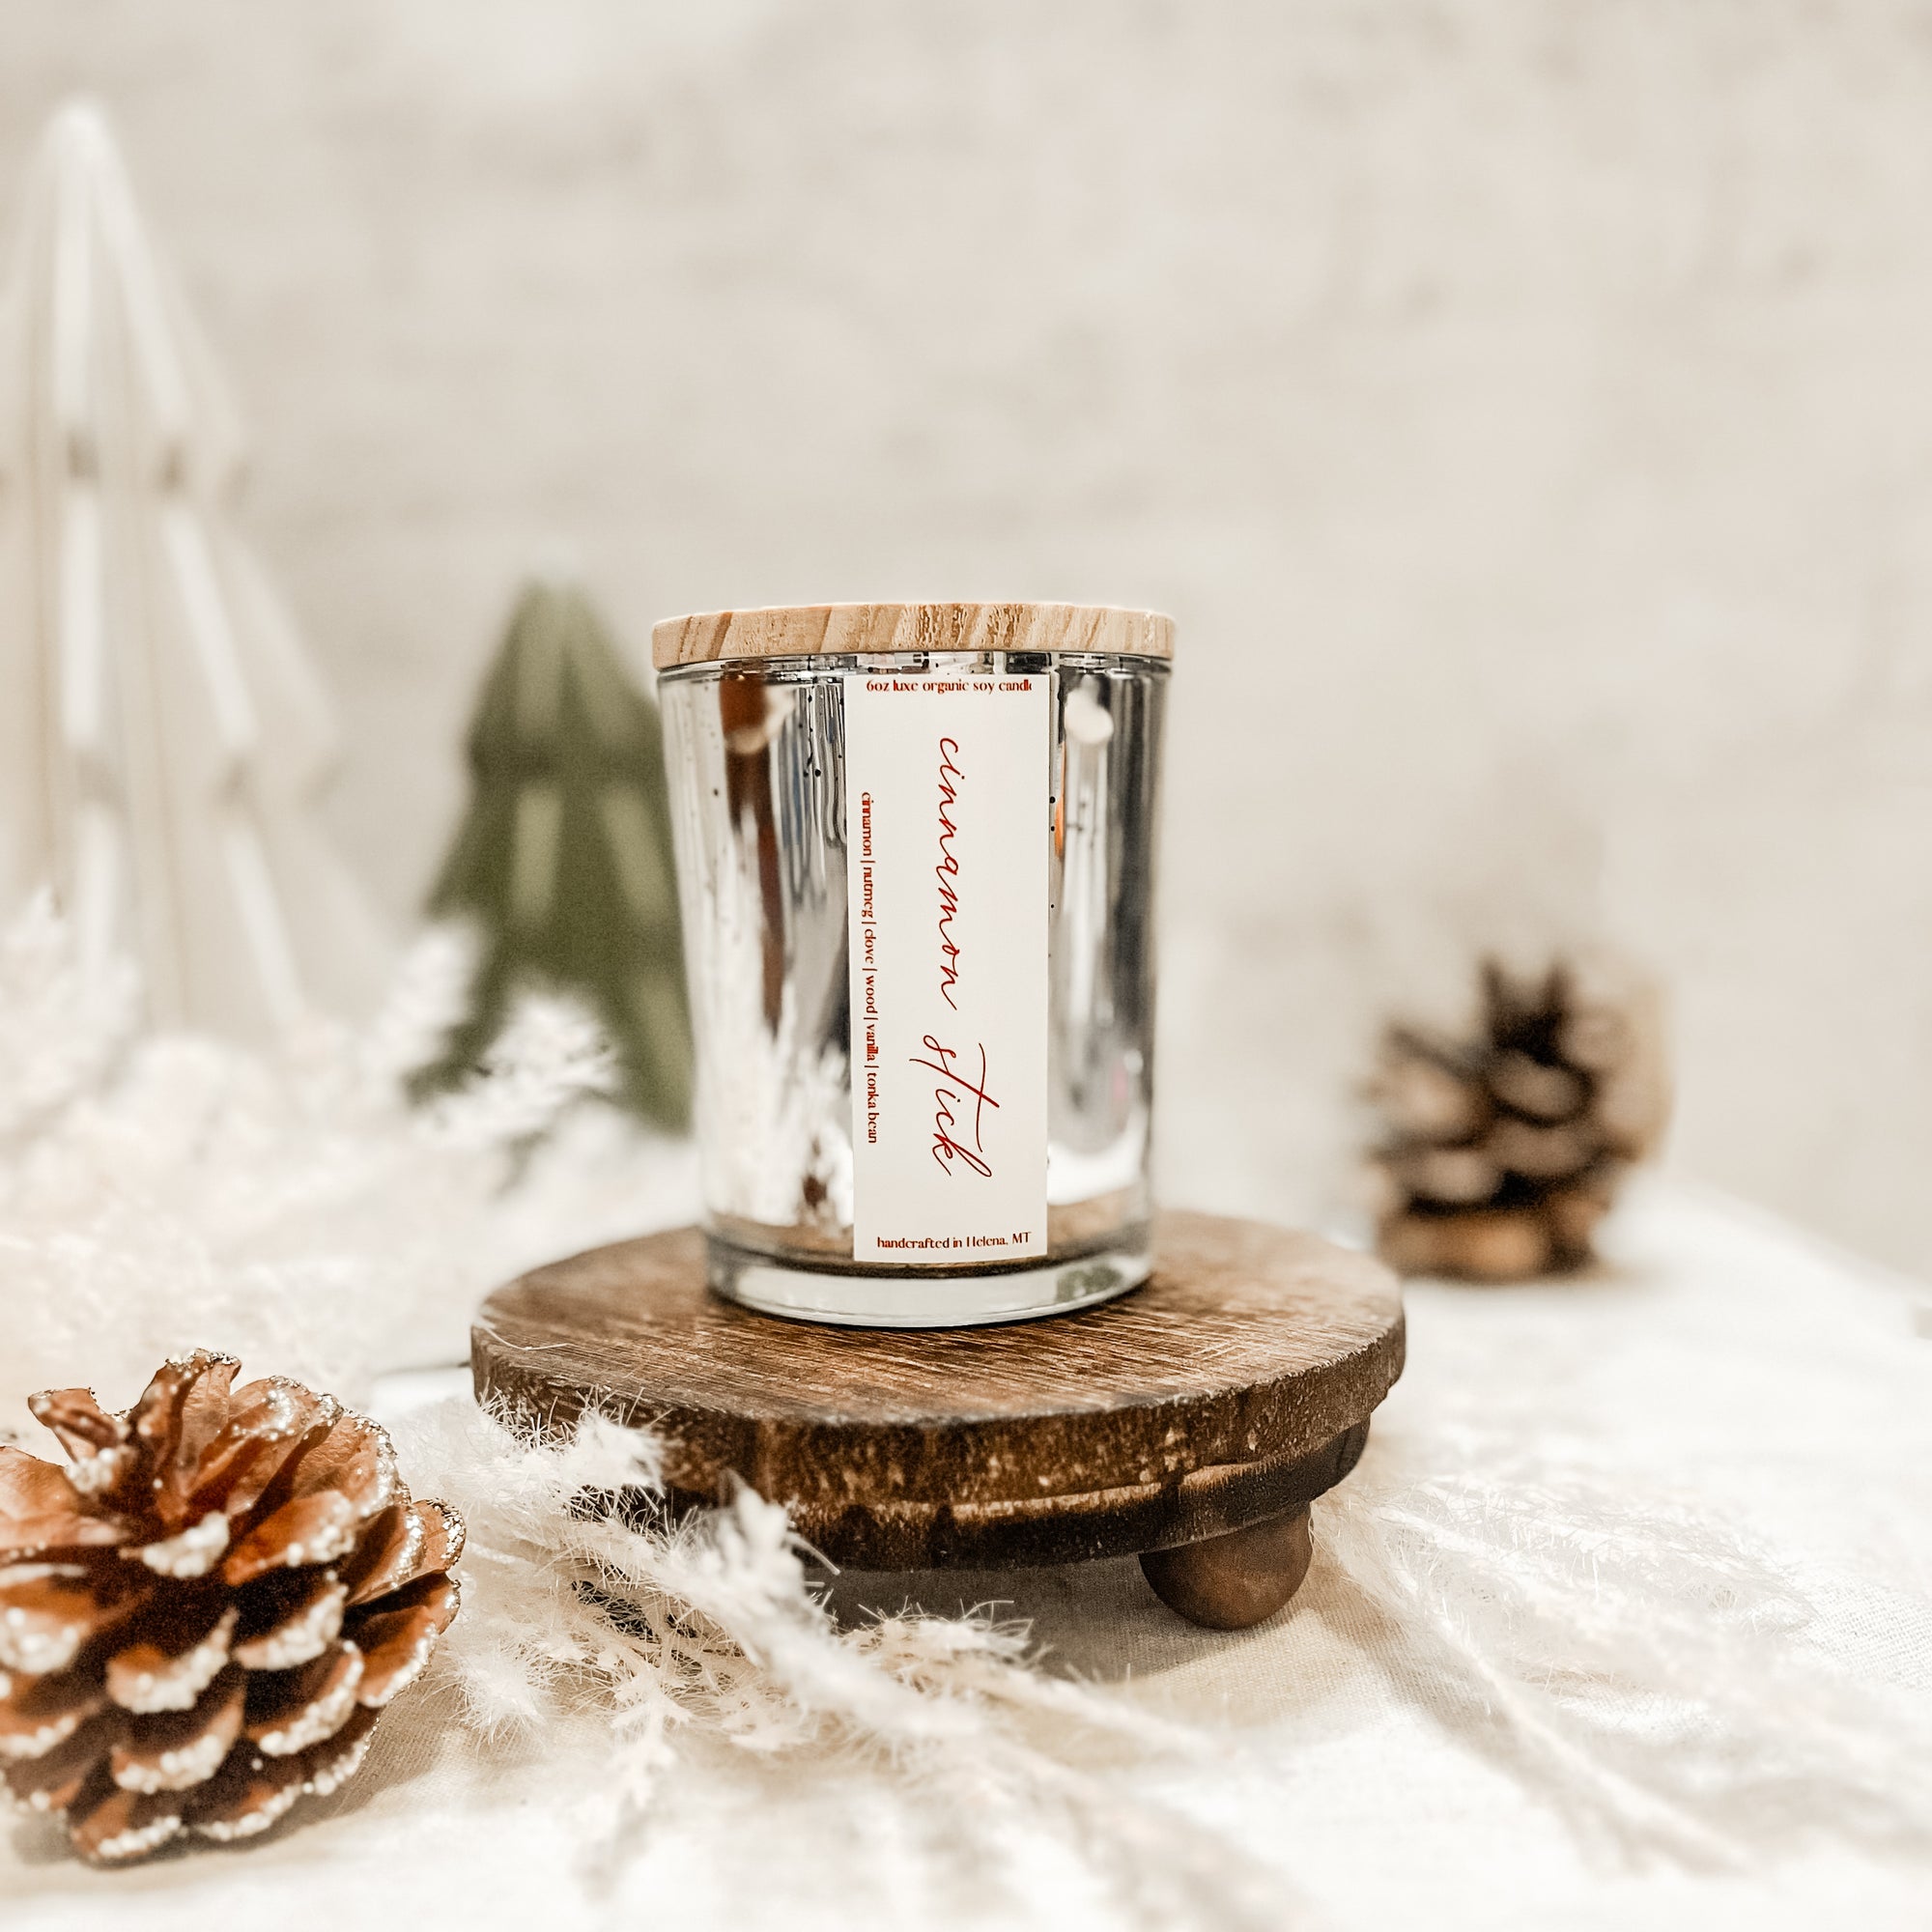 Cinnamon Stick Wooden Wick Soy Candle